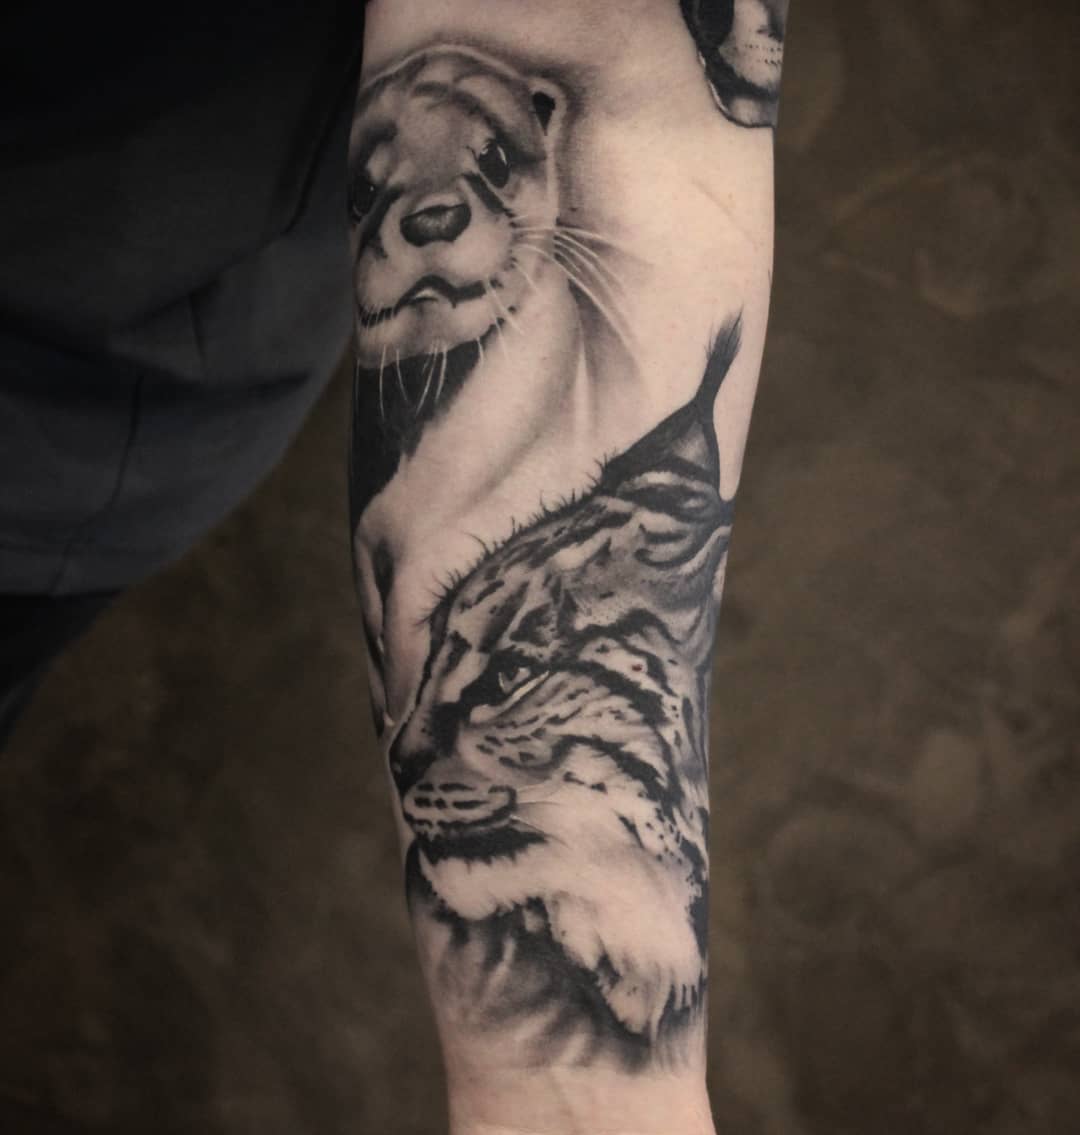 Healed and hairy lynx. Thank you soch much Jürgen for the trust
#germantattooers